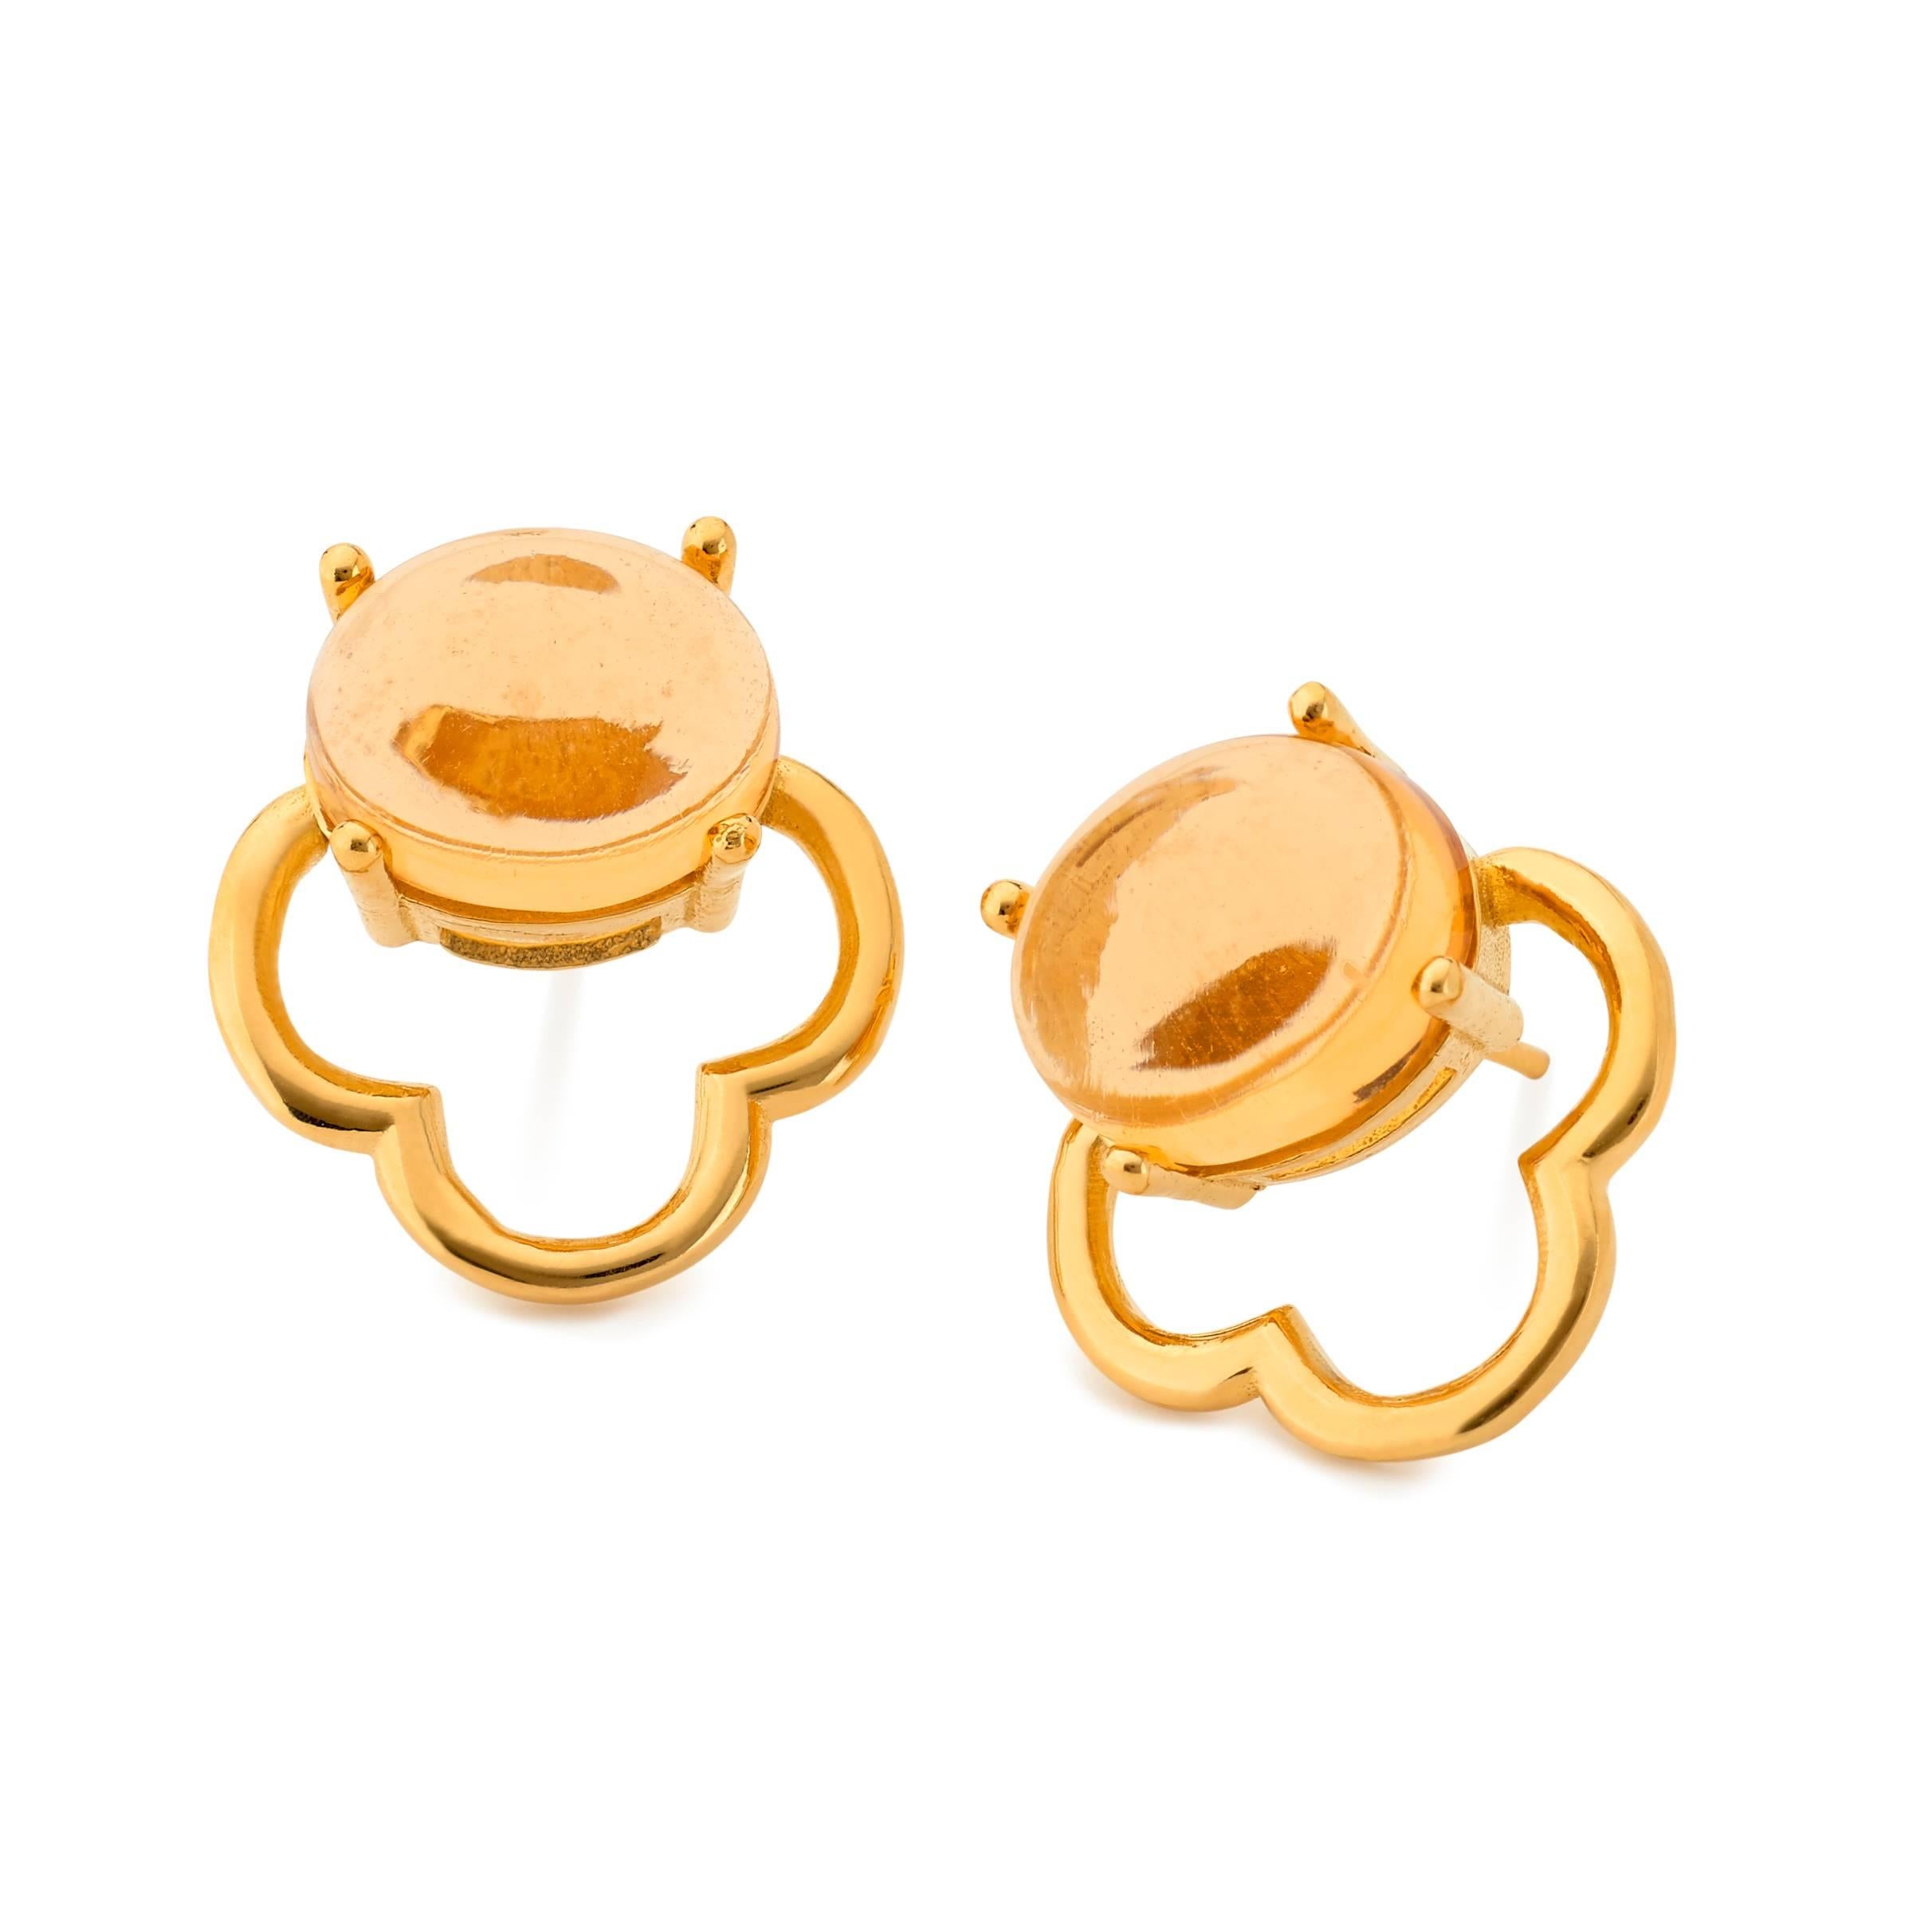 These fantastically feminine earrings offer a simple yet sophisticated look that can take you from the office right through to a night out on the town. The total length is 24mm, the gold is 2mm deep, and they measure 20mm at their widest point.